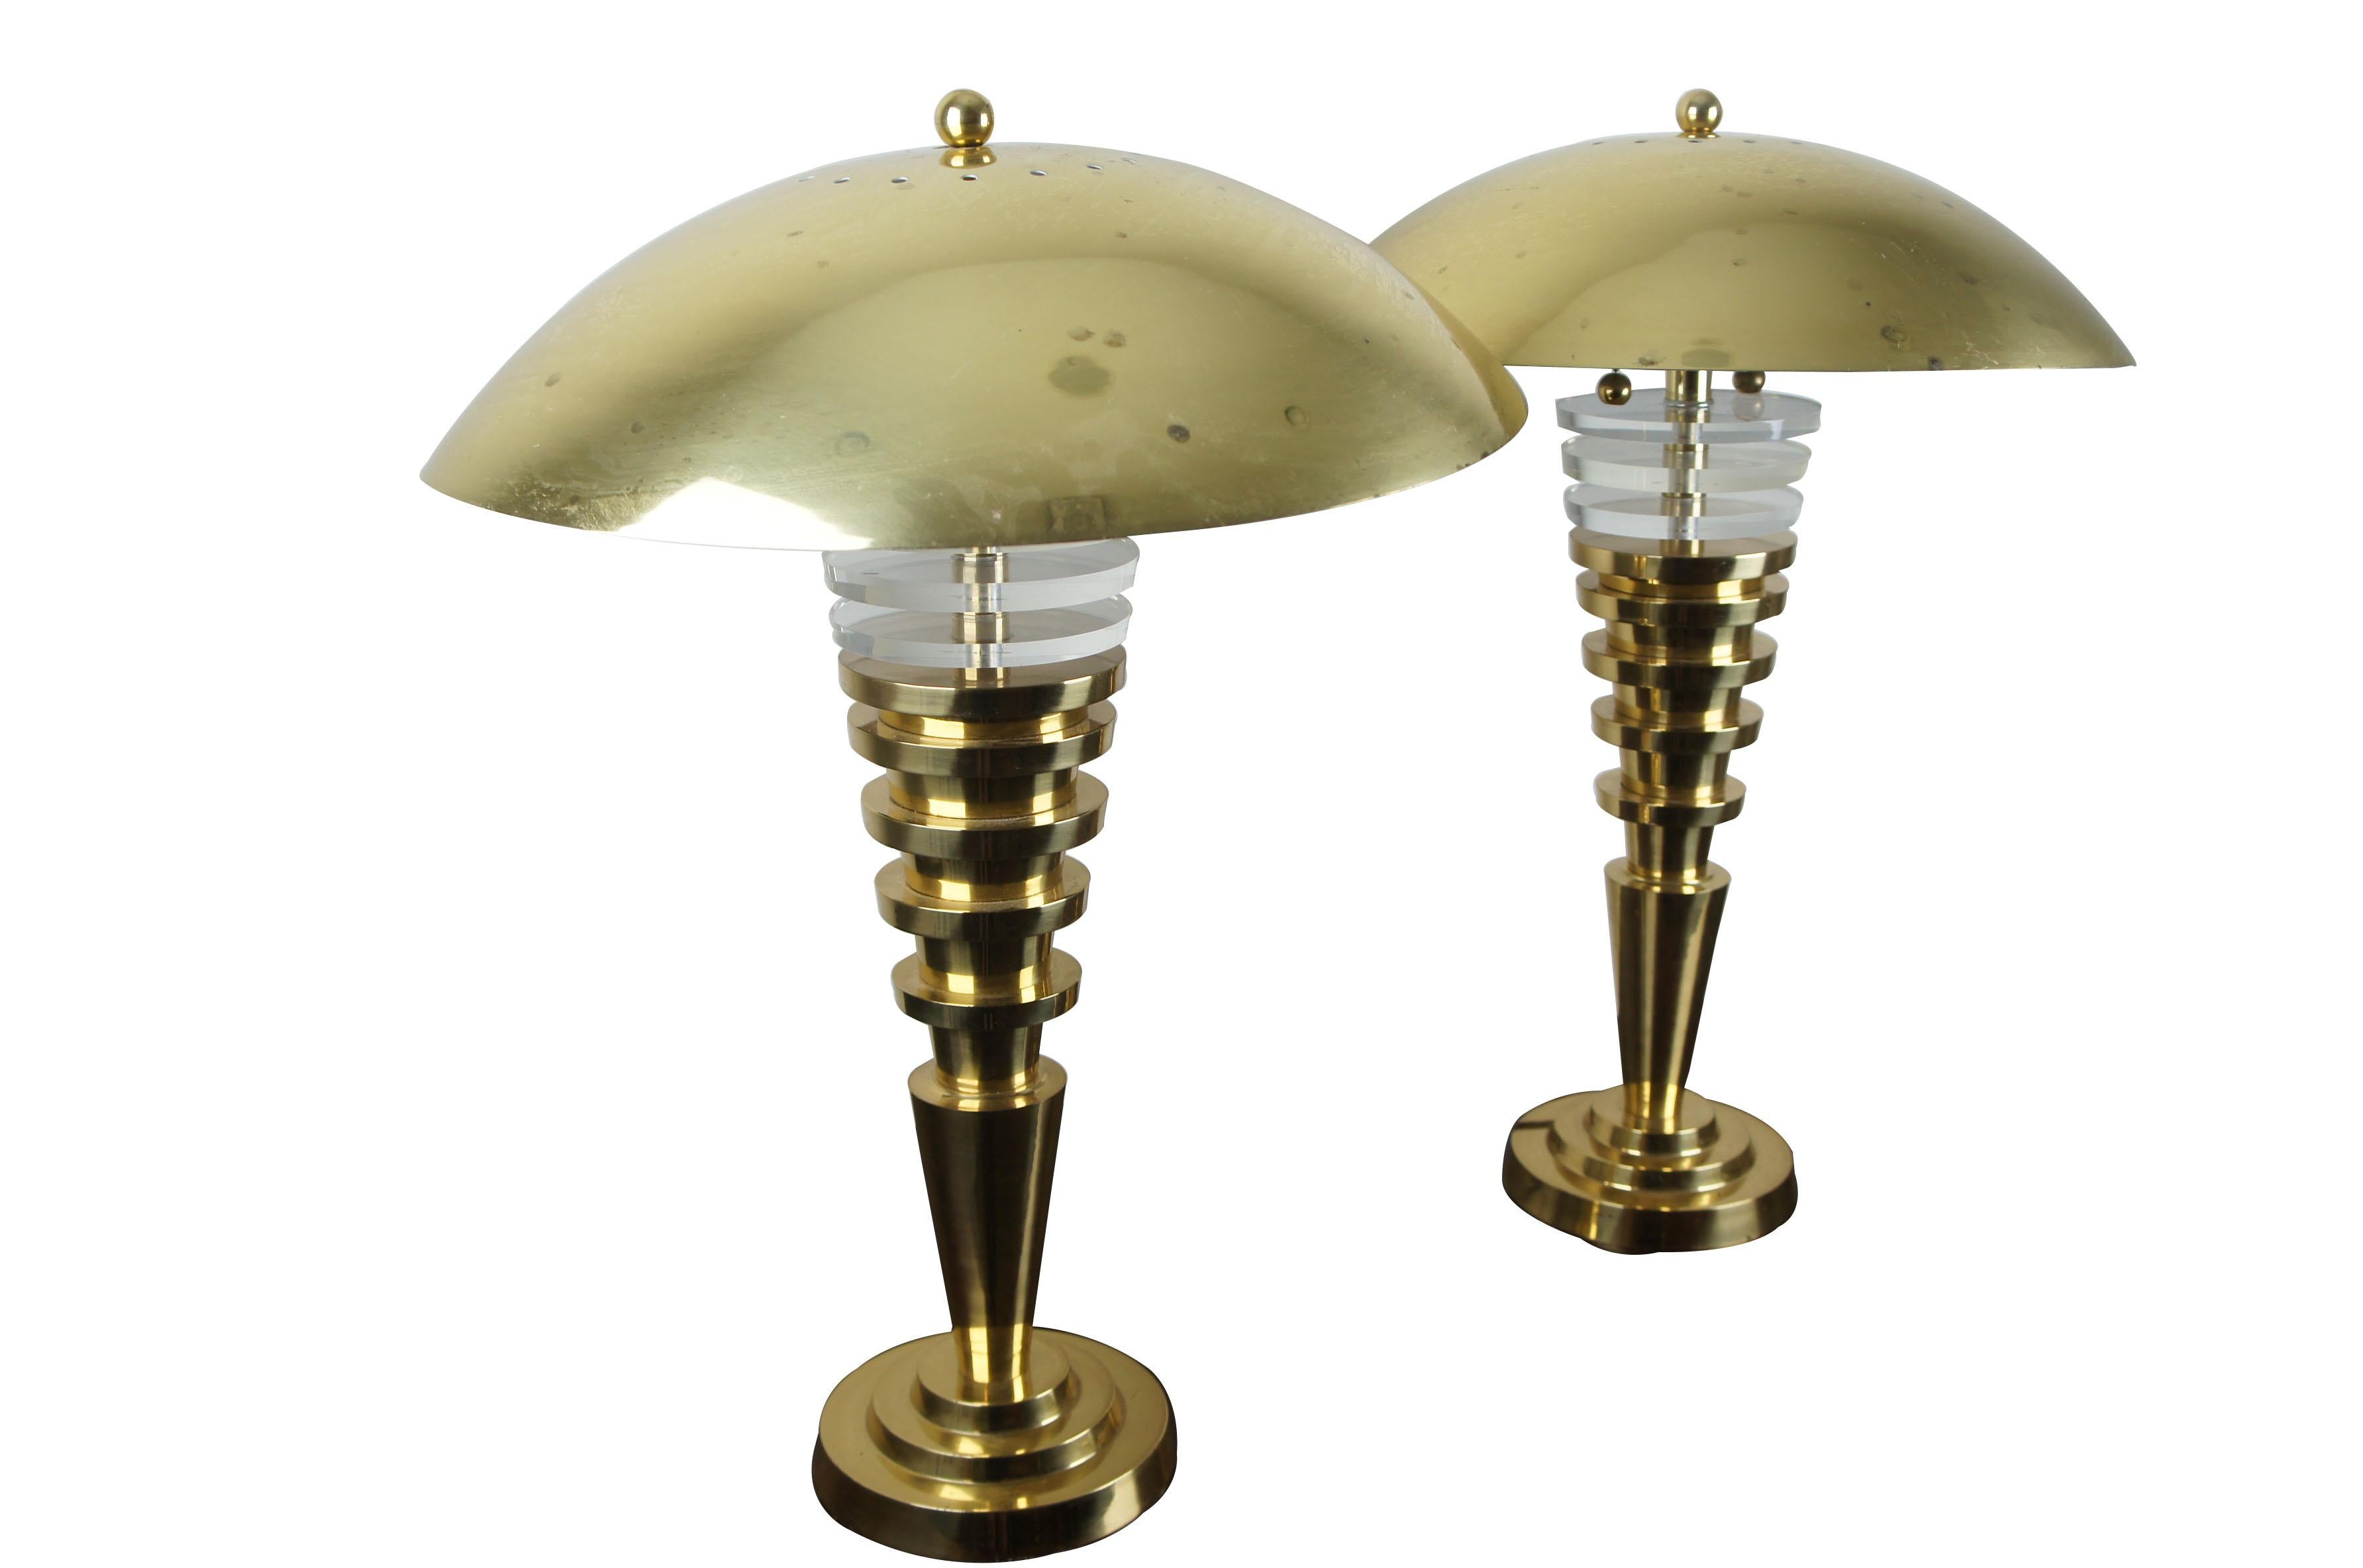 2 vintage Regency brass acrylic MCM Lucite table lamps Charles Hollis Jones pair

Charles Hollis Jones is an American artist and furniture designer known for his use of acrylic and lucite.
This beautiful vintage pair of lamps feature brass and